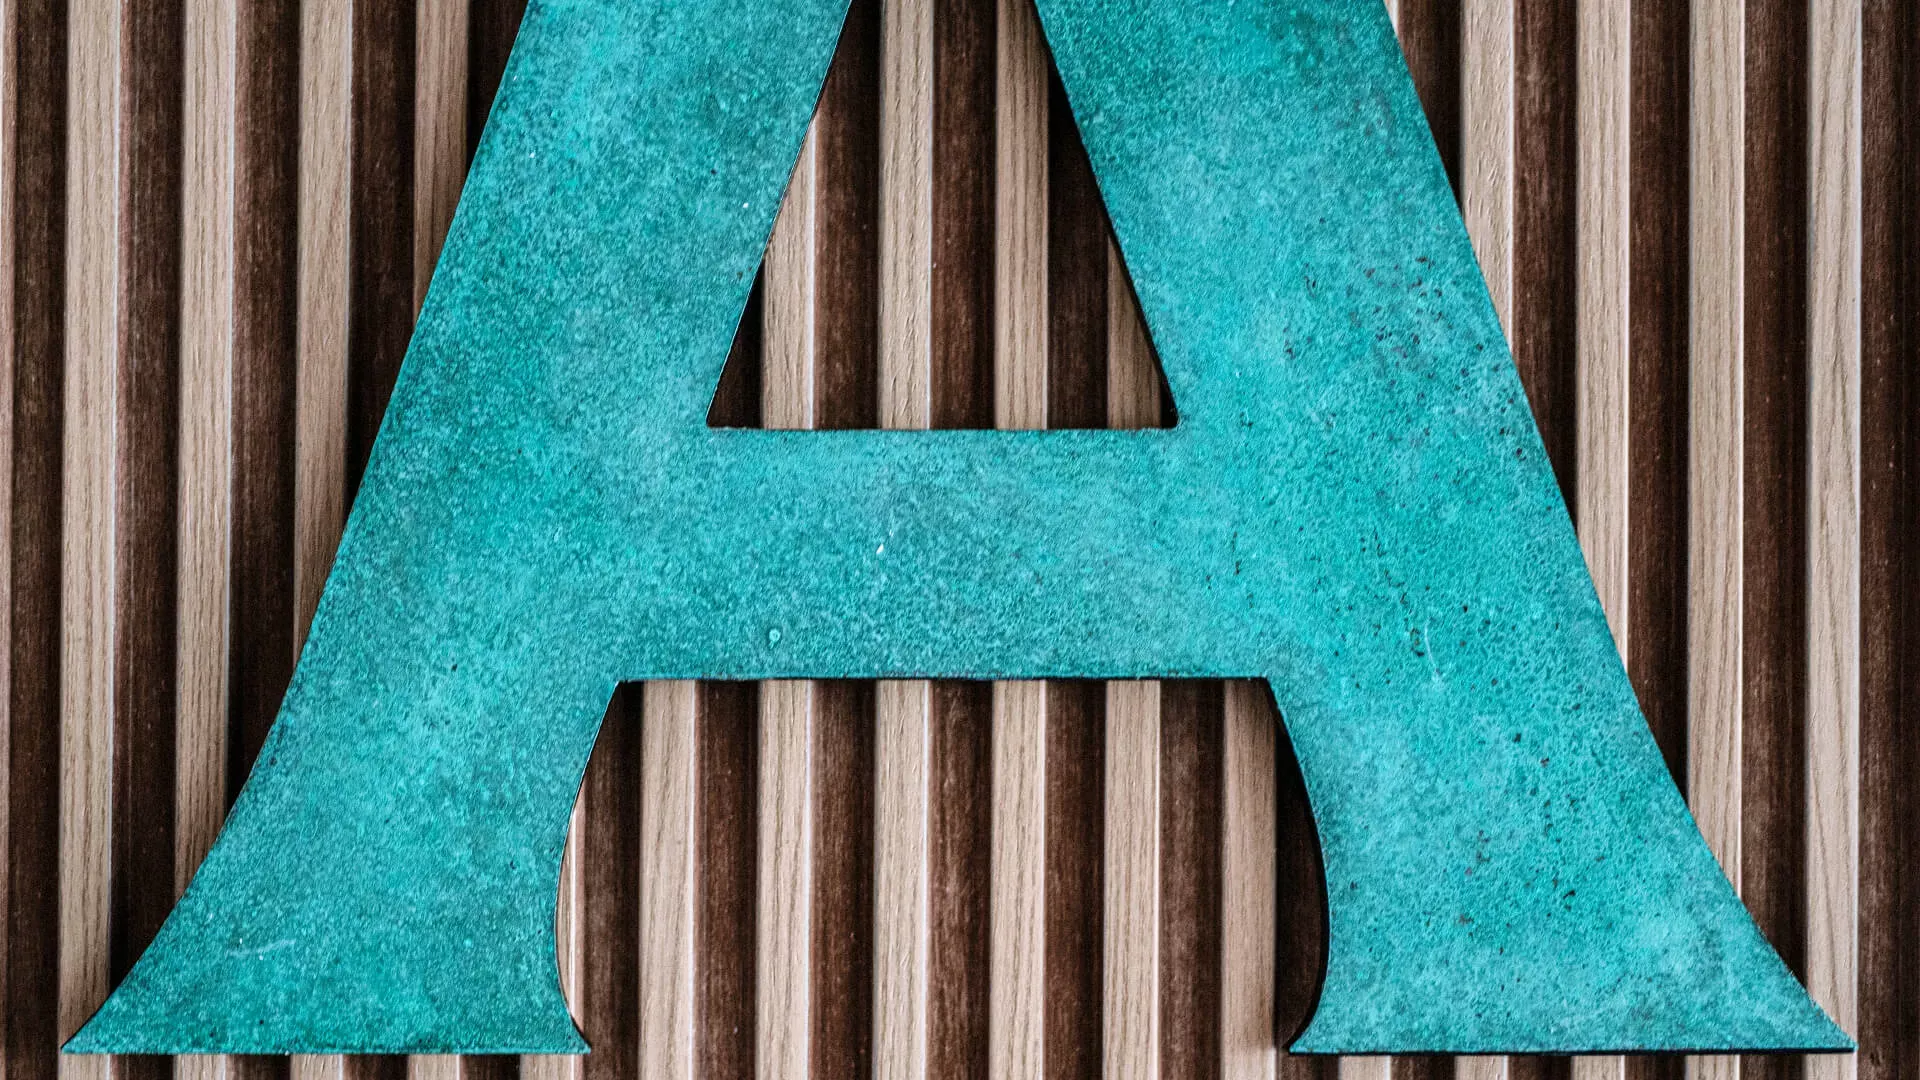 Letter A - made of metal in industrial style, covered with patina